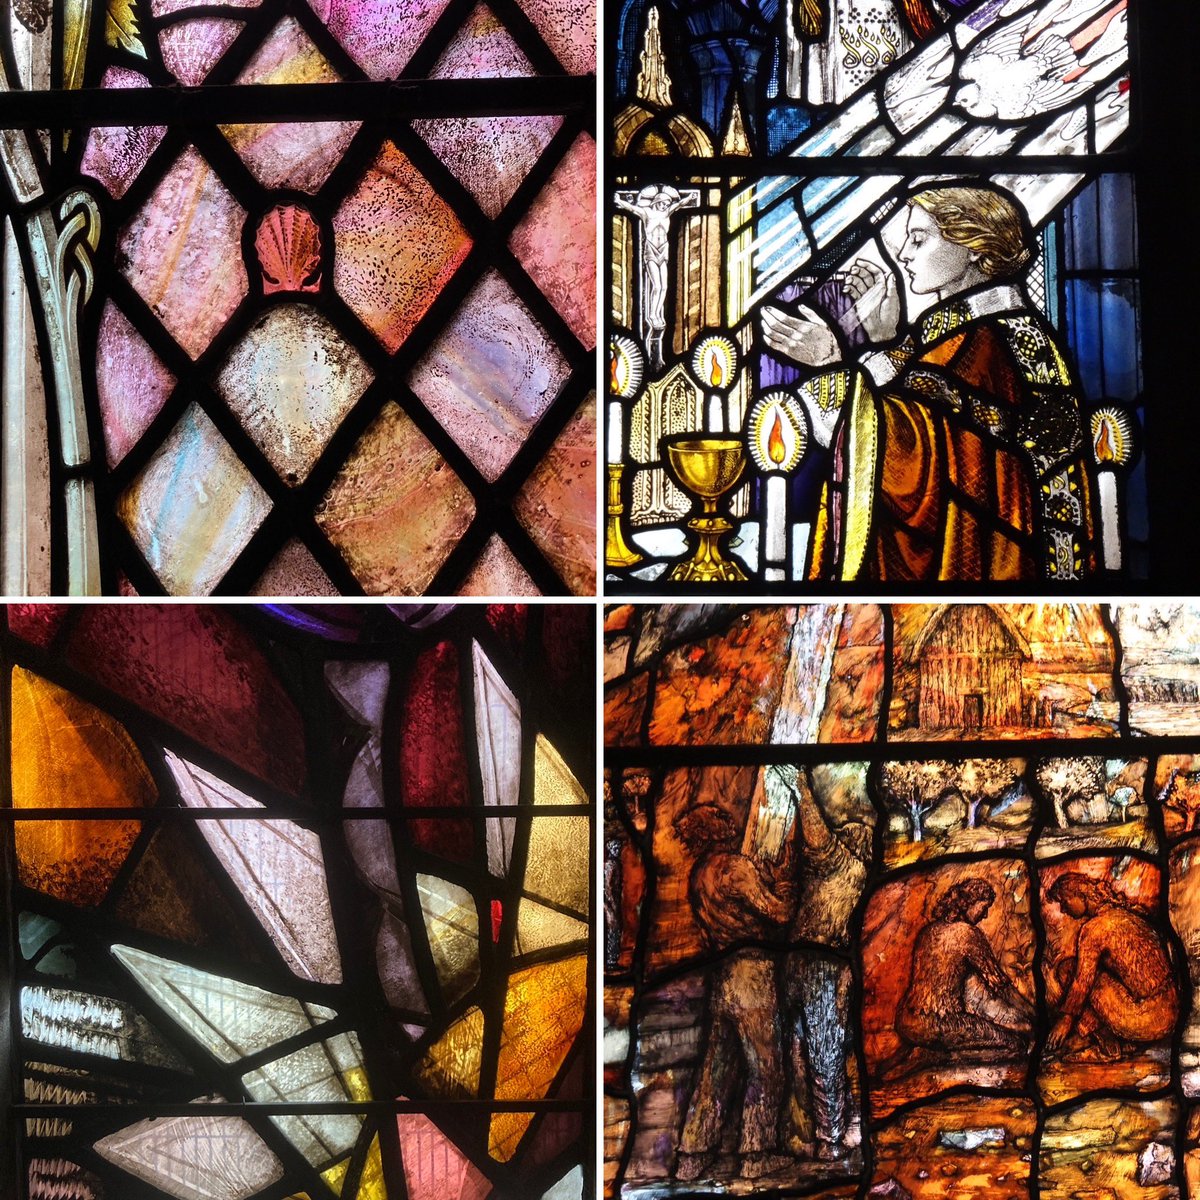 2023 offered many opportunities to see beautiful stained glass - making new friends along the way - excited for more adventures in 2024! Here are just a few of the remarkable examples I saw this year. #StainedGlassEveryday #StainedGlassSunday @BSMGP